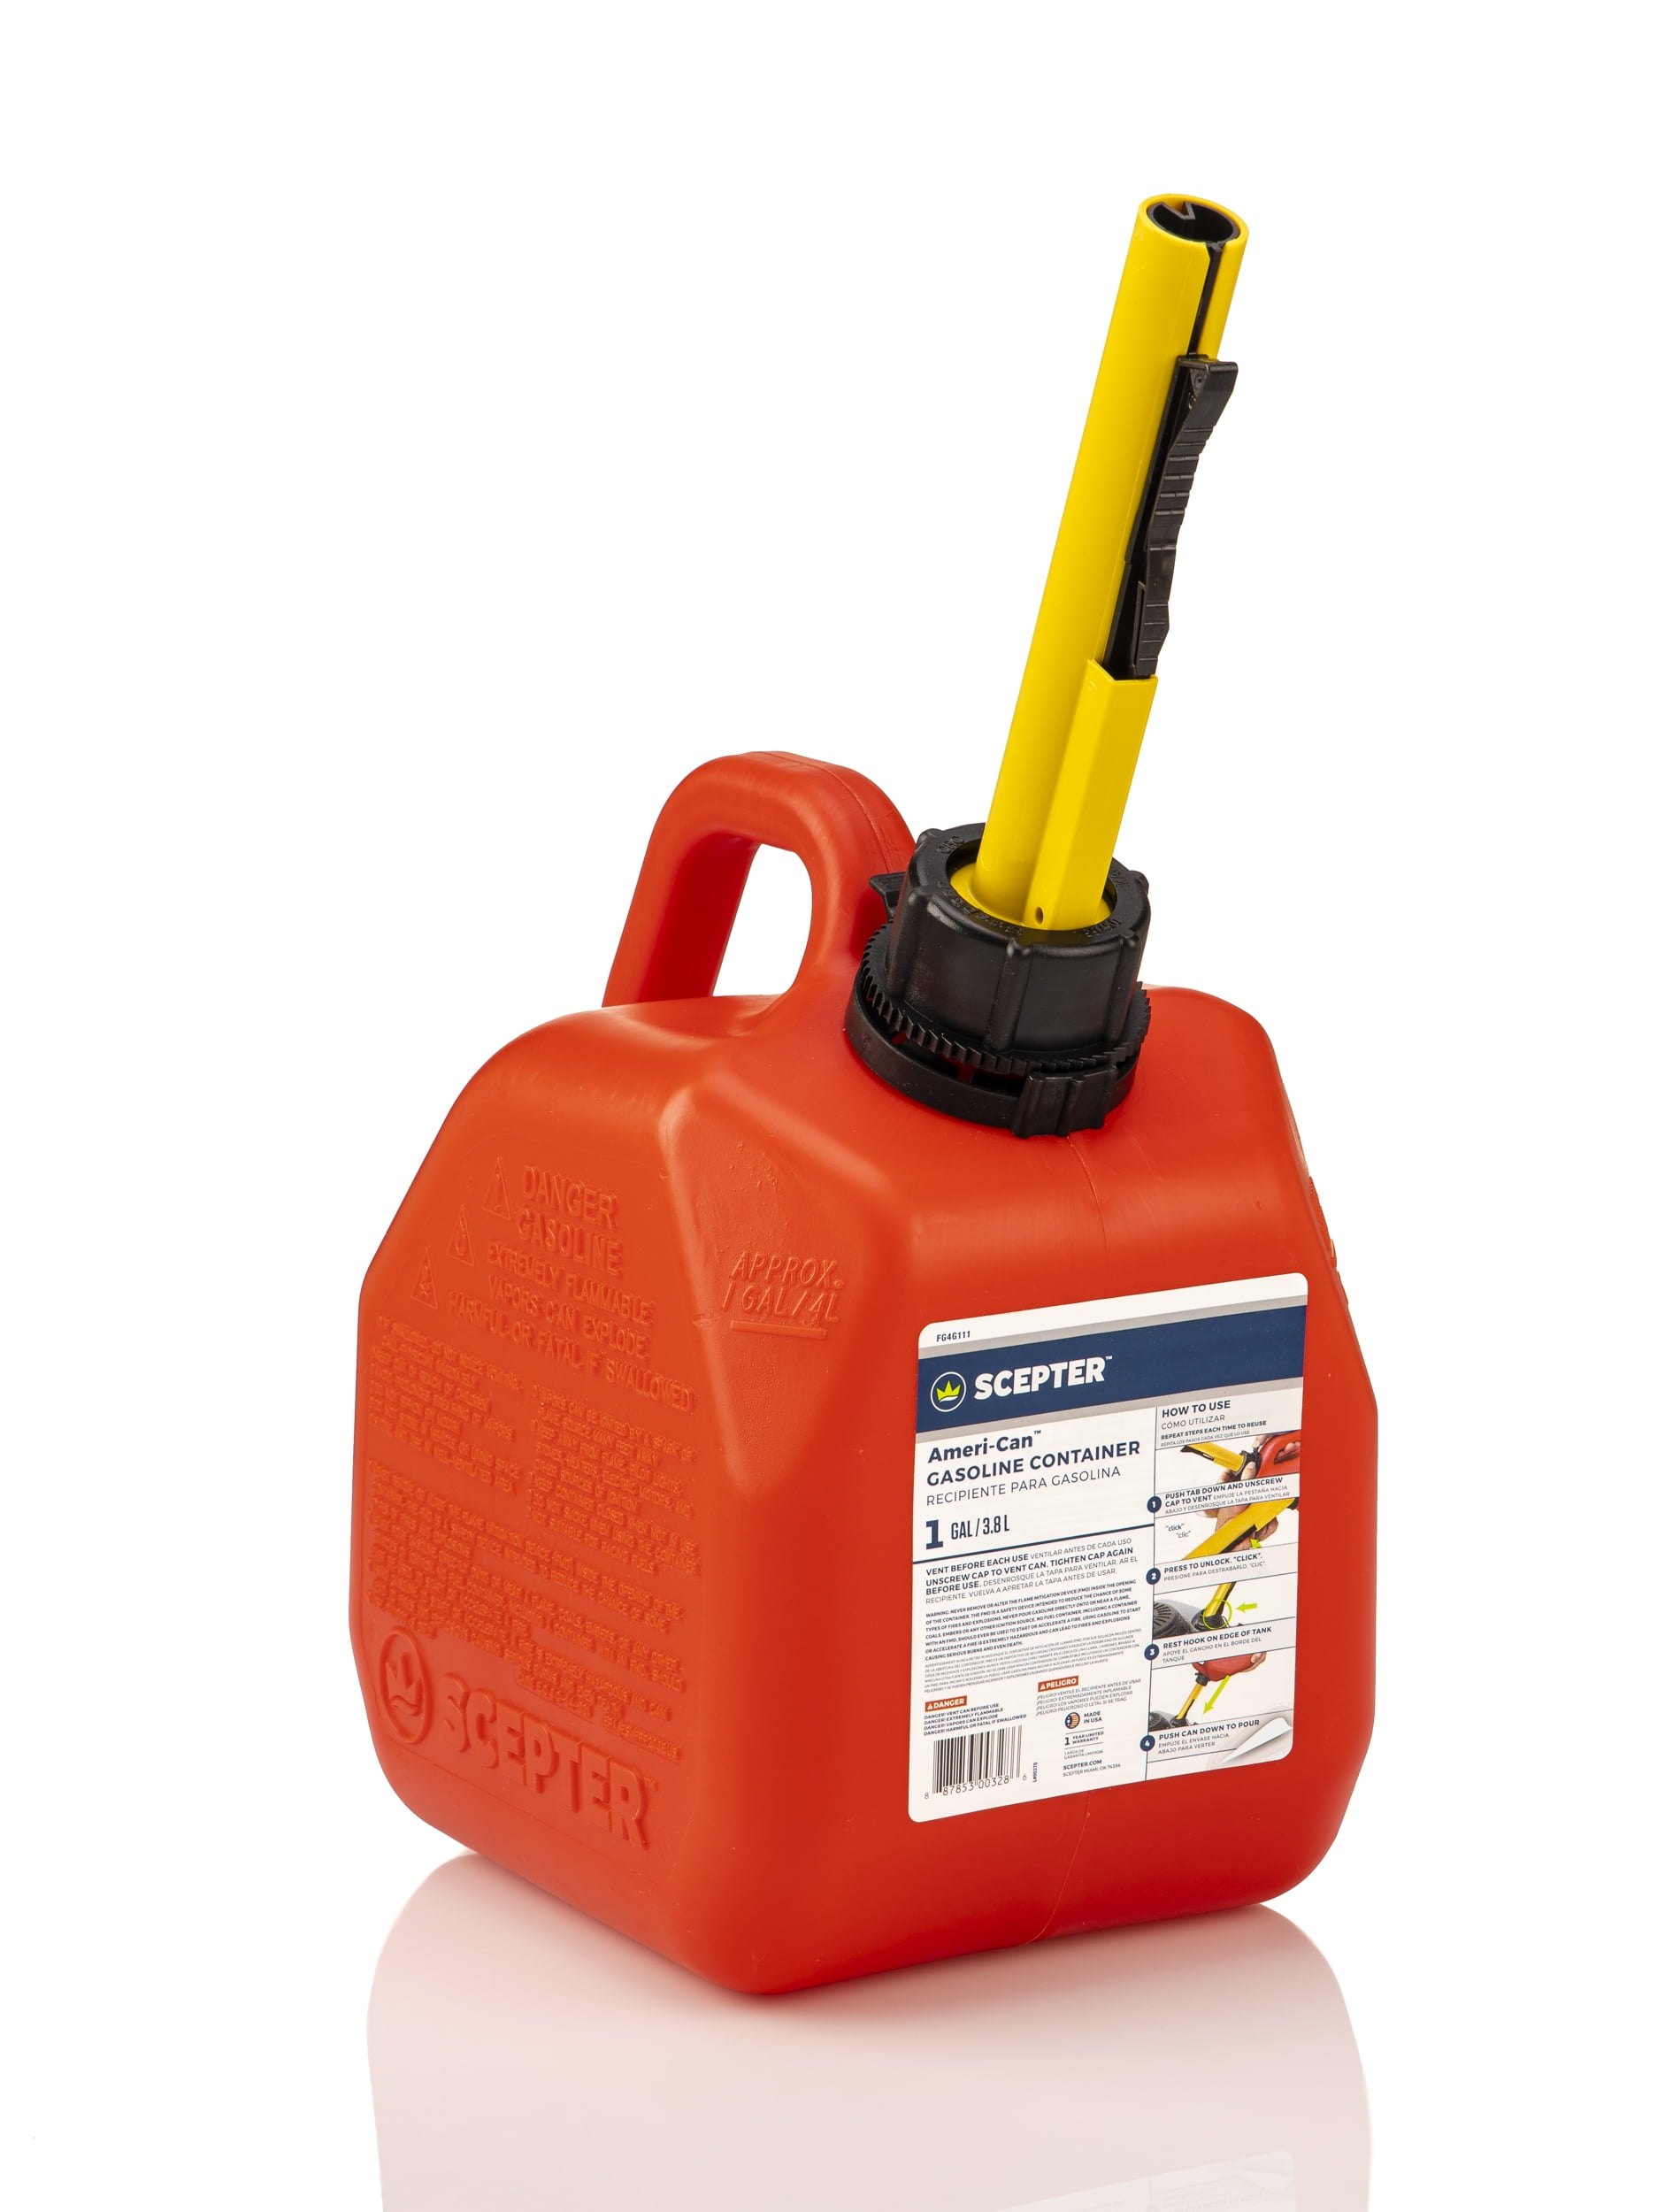 Scepter 1 Gallon SmartControl Gas Can FR1G101 Red for sale online 